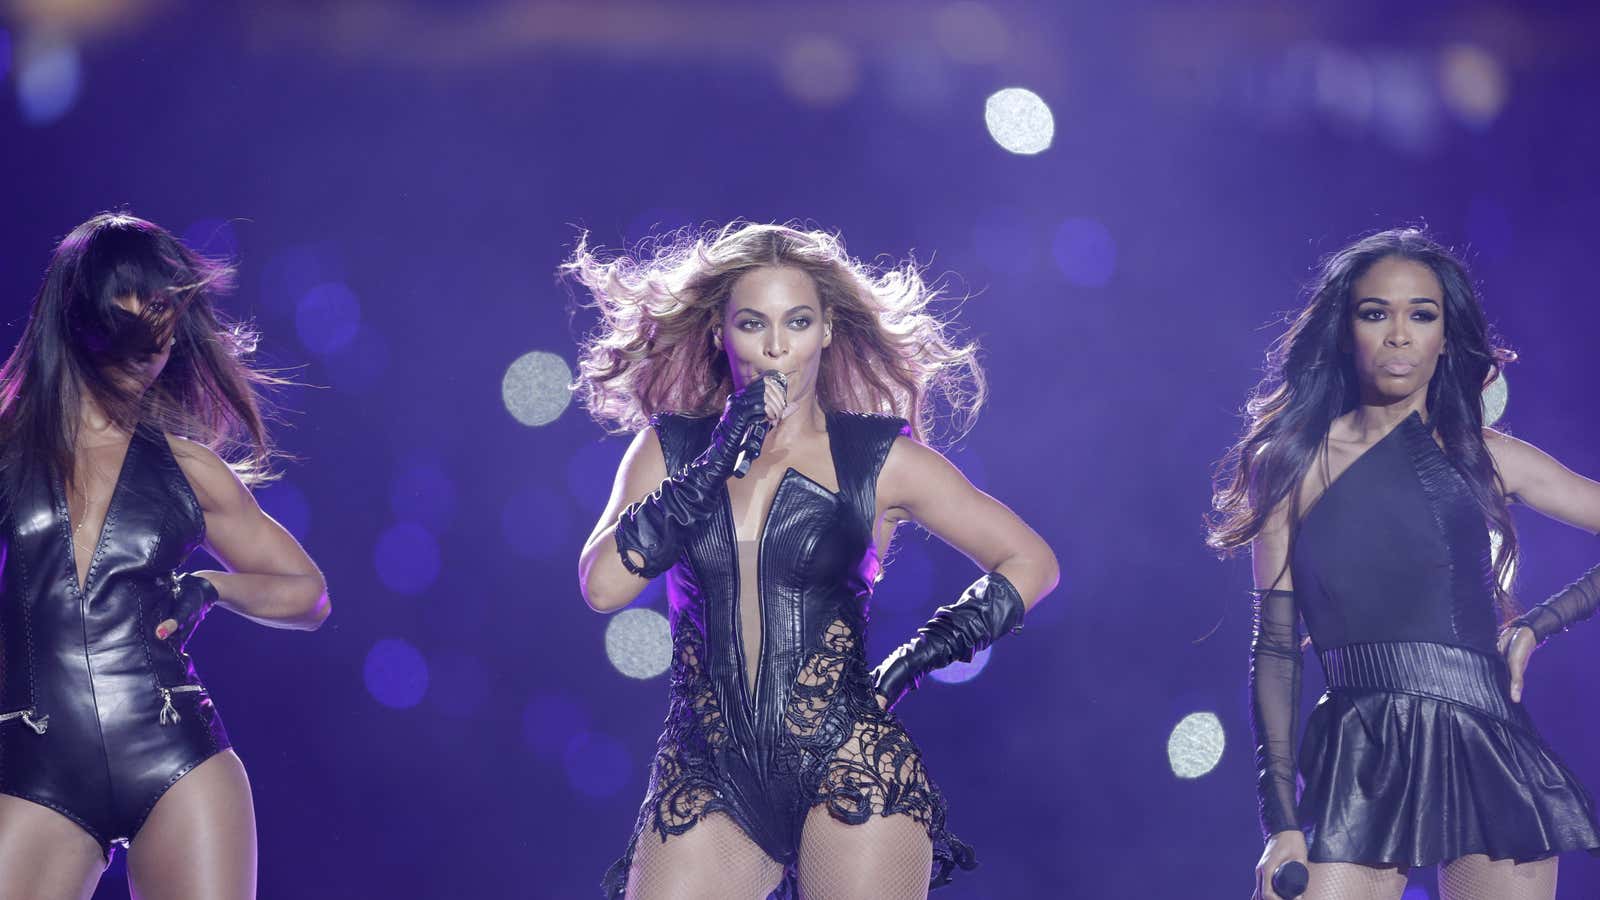 Beyonce performs during the halftime show of  the NFL Super Bowl XLVII football game between the San Francisco 49ers and the Baltimore Ravens Sunday, Feb. 3, 2013, in New Orleans. (AP Photo/David Goldman)